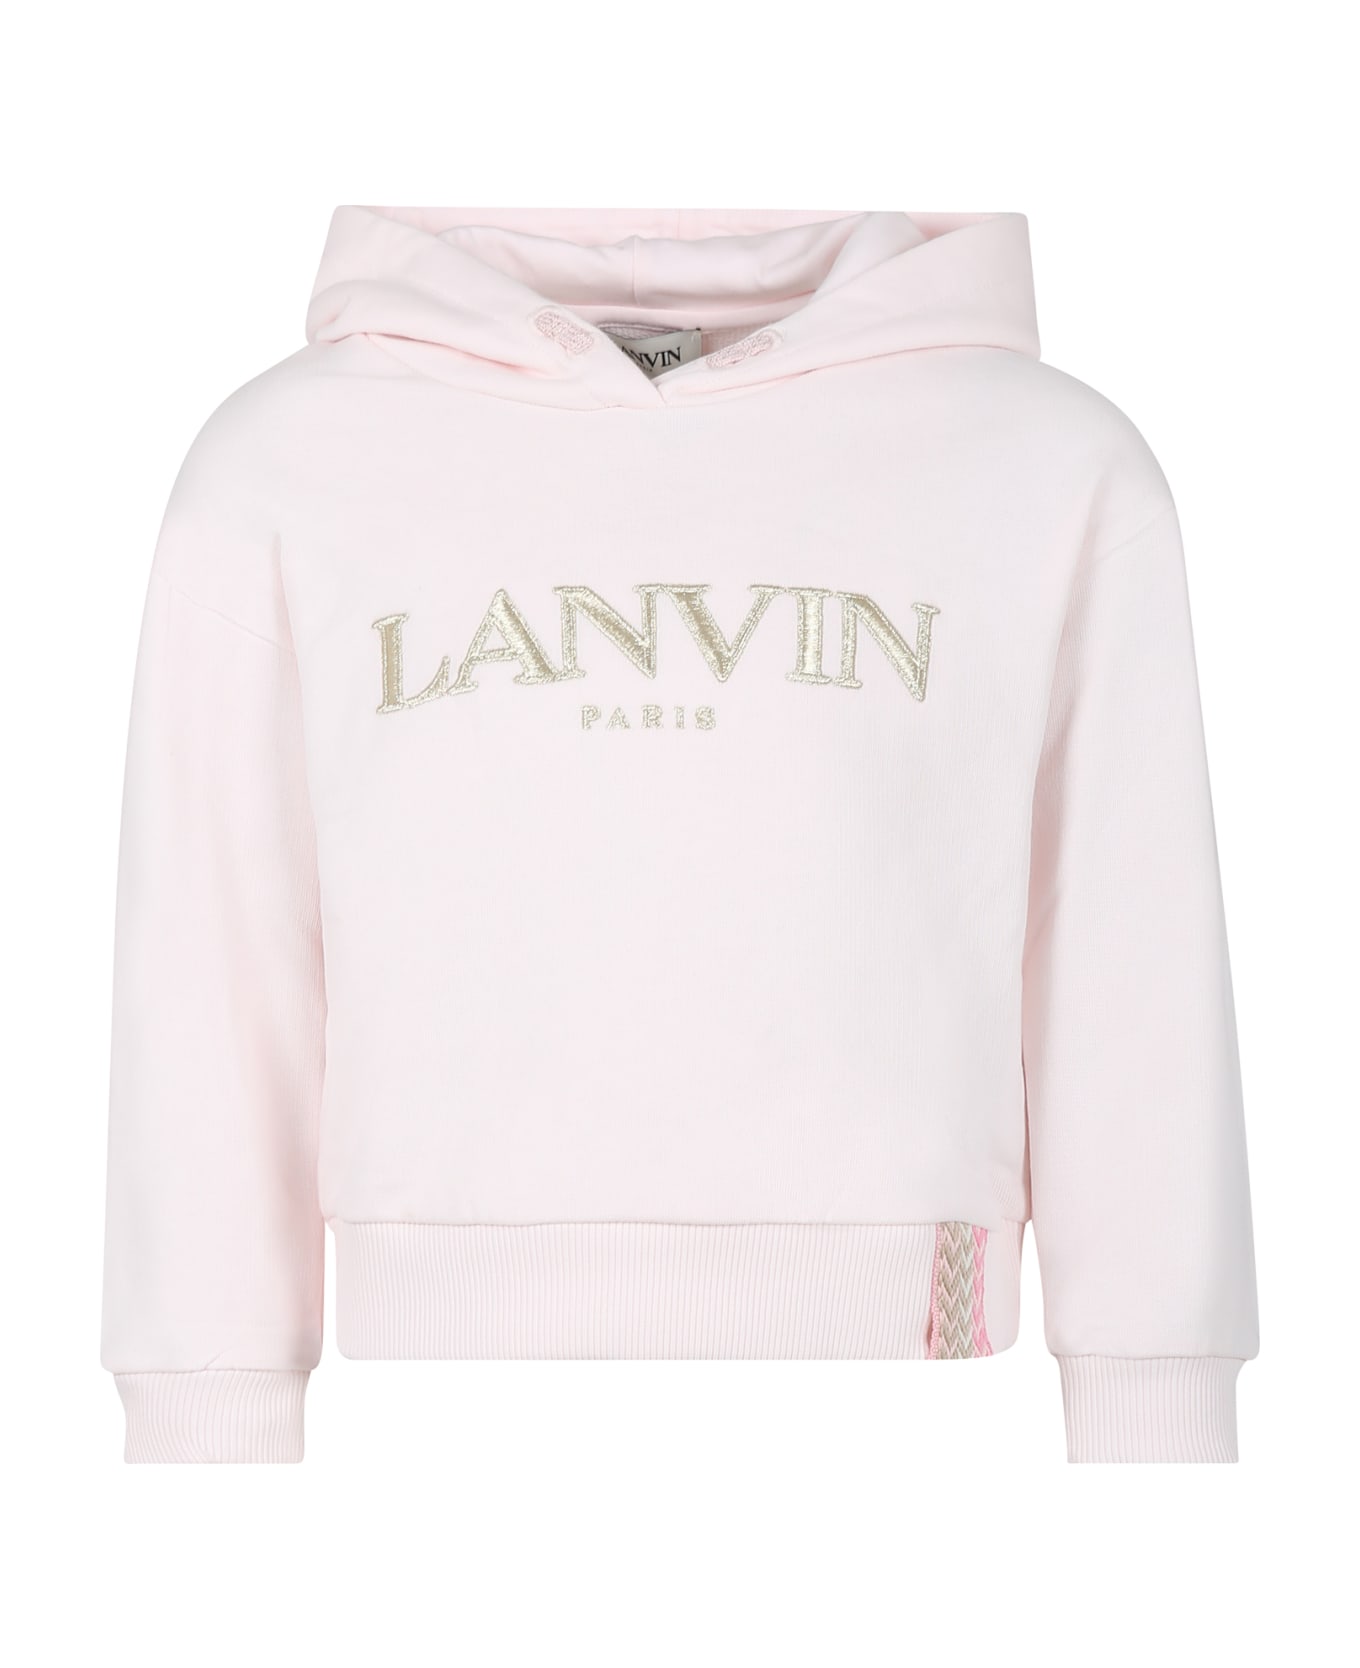 Lanvin Pink Sweatshirt With Hood For Girl With Logo - N Rosa Antico